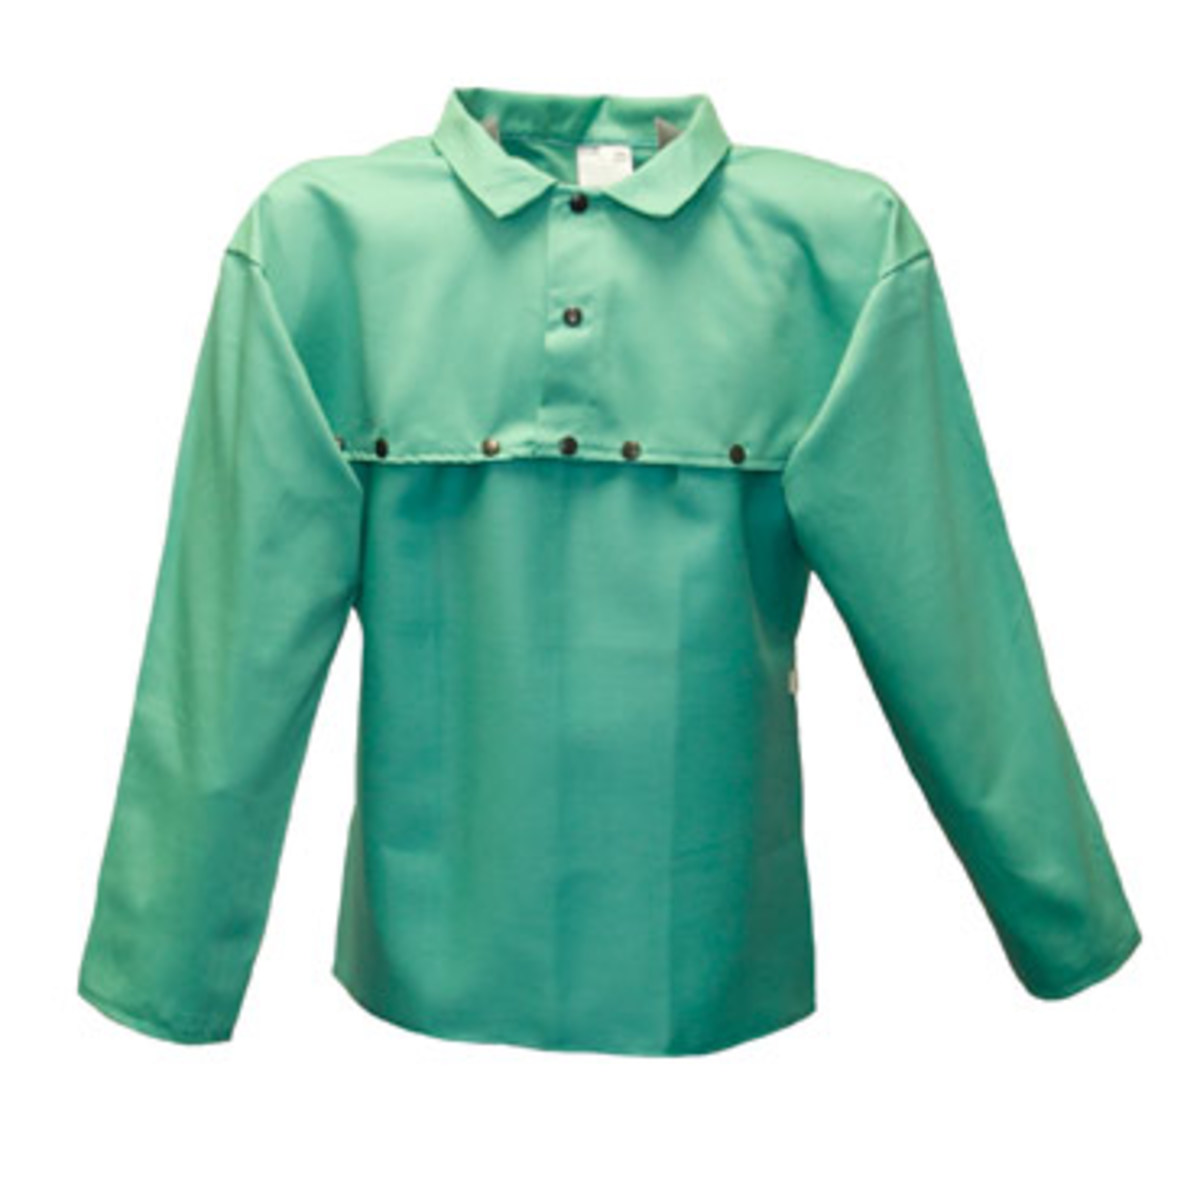 Stanco Safety Products™ 3X Green Cotton Flame Resistant Cape Sleeve With Snap Closure And 20